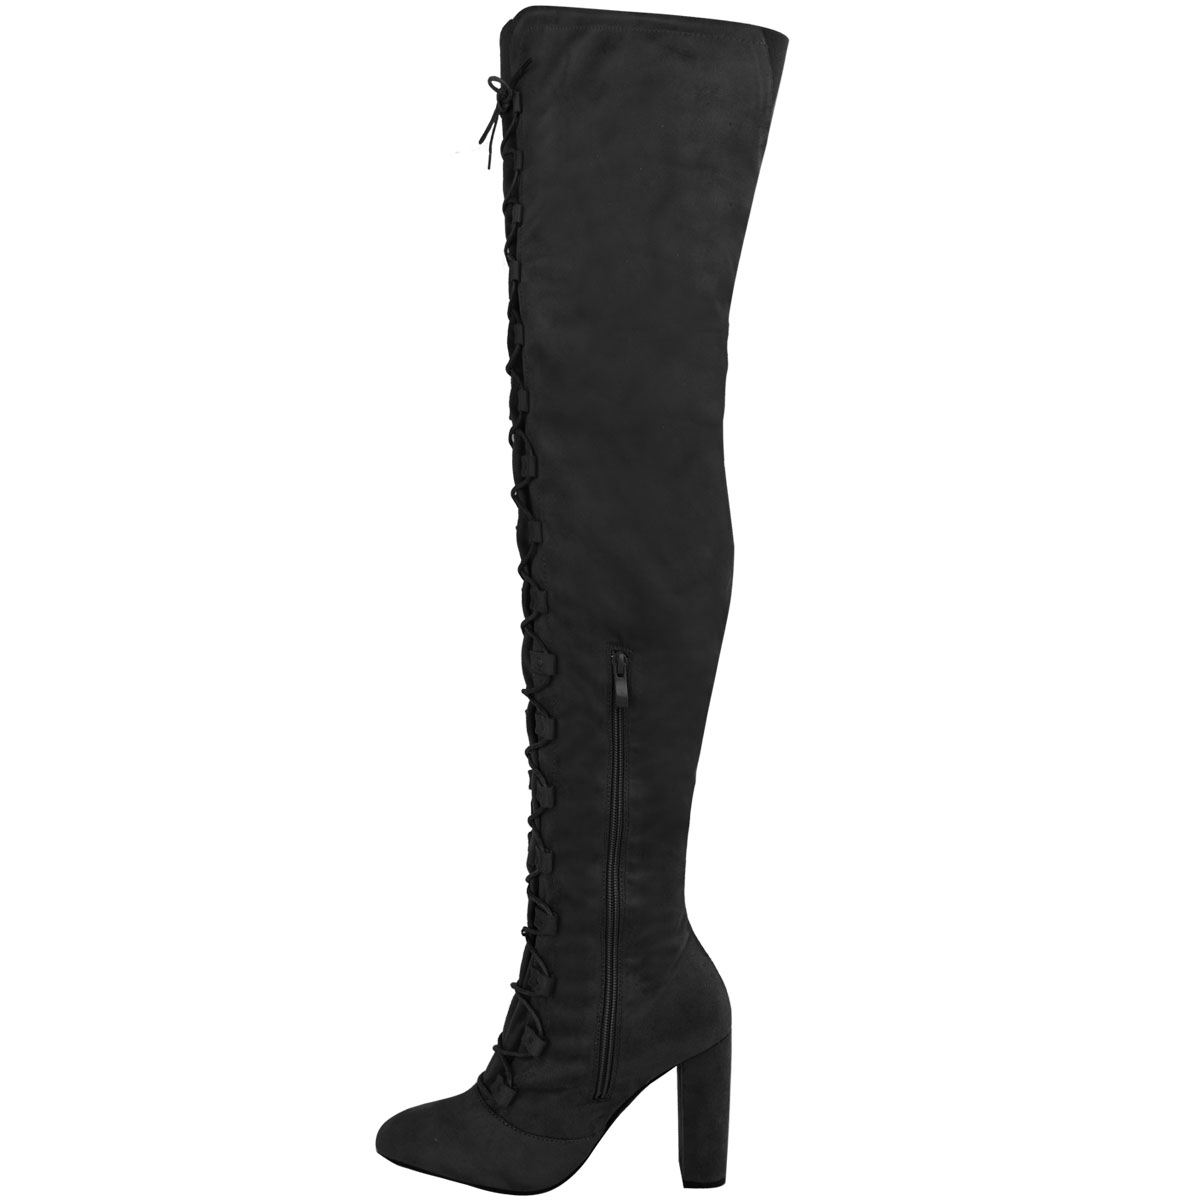 Womens Ladies Thigh High Over The Knee Boots Lace Up Block Heels Winter ...